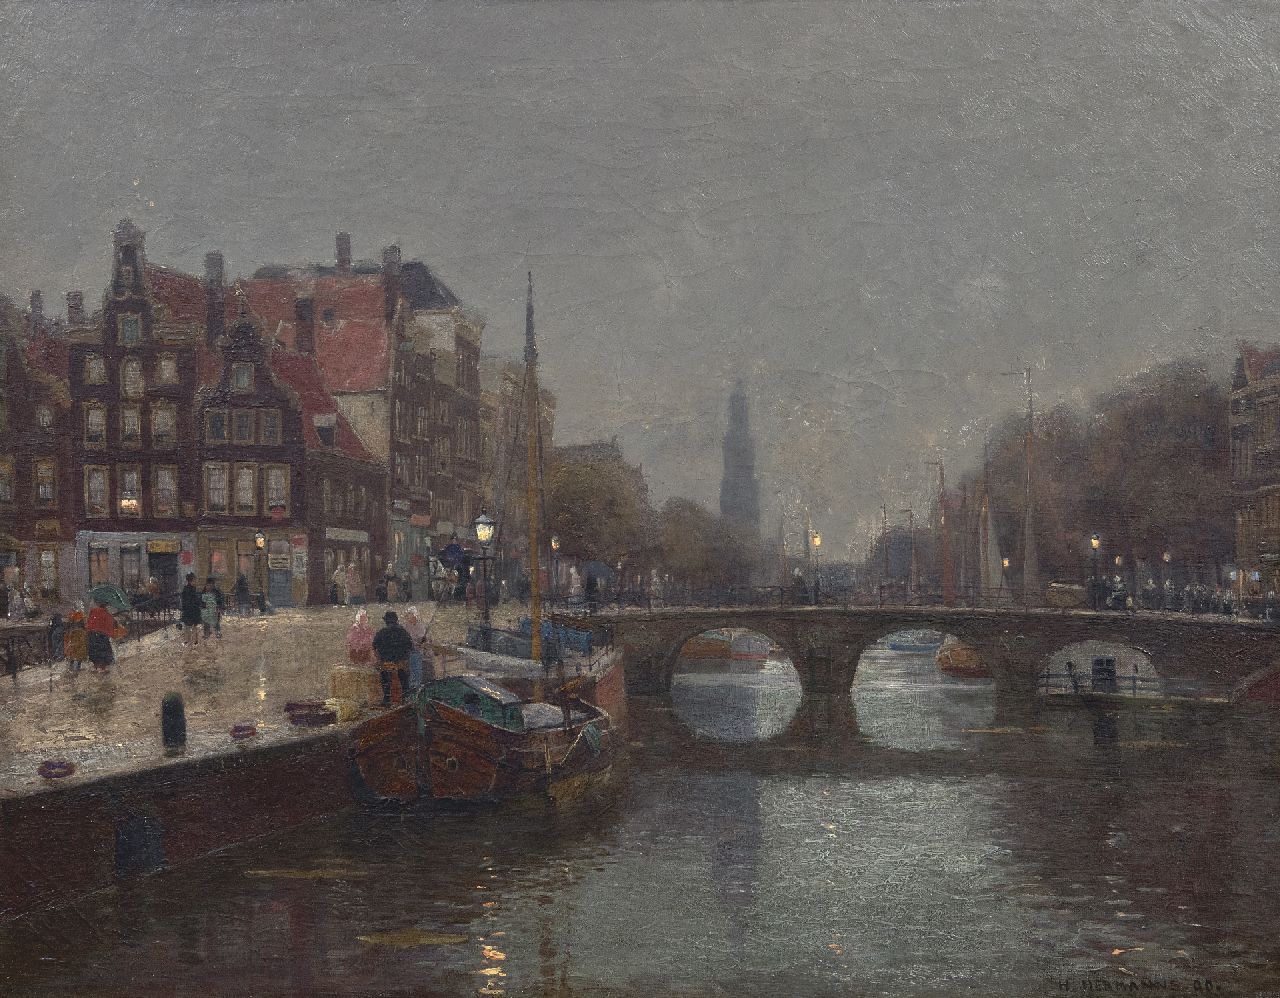 Hermanns H.  | Heinrich Hermanns, The Prinsengracht in Amsterdam on a rainy day, oil on canvas 55.8 x 70.7 cm, signed l.r. and dated '90